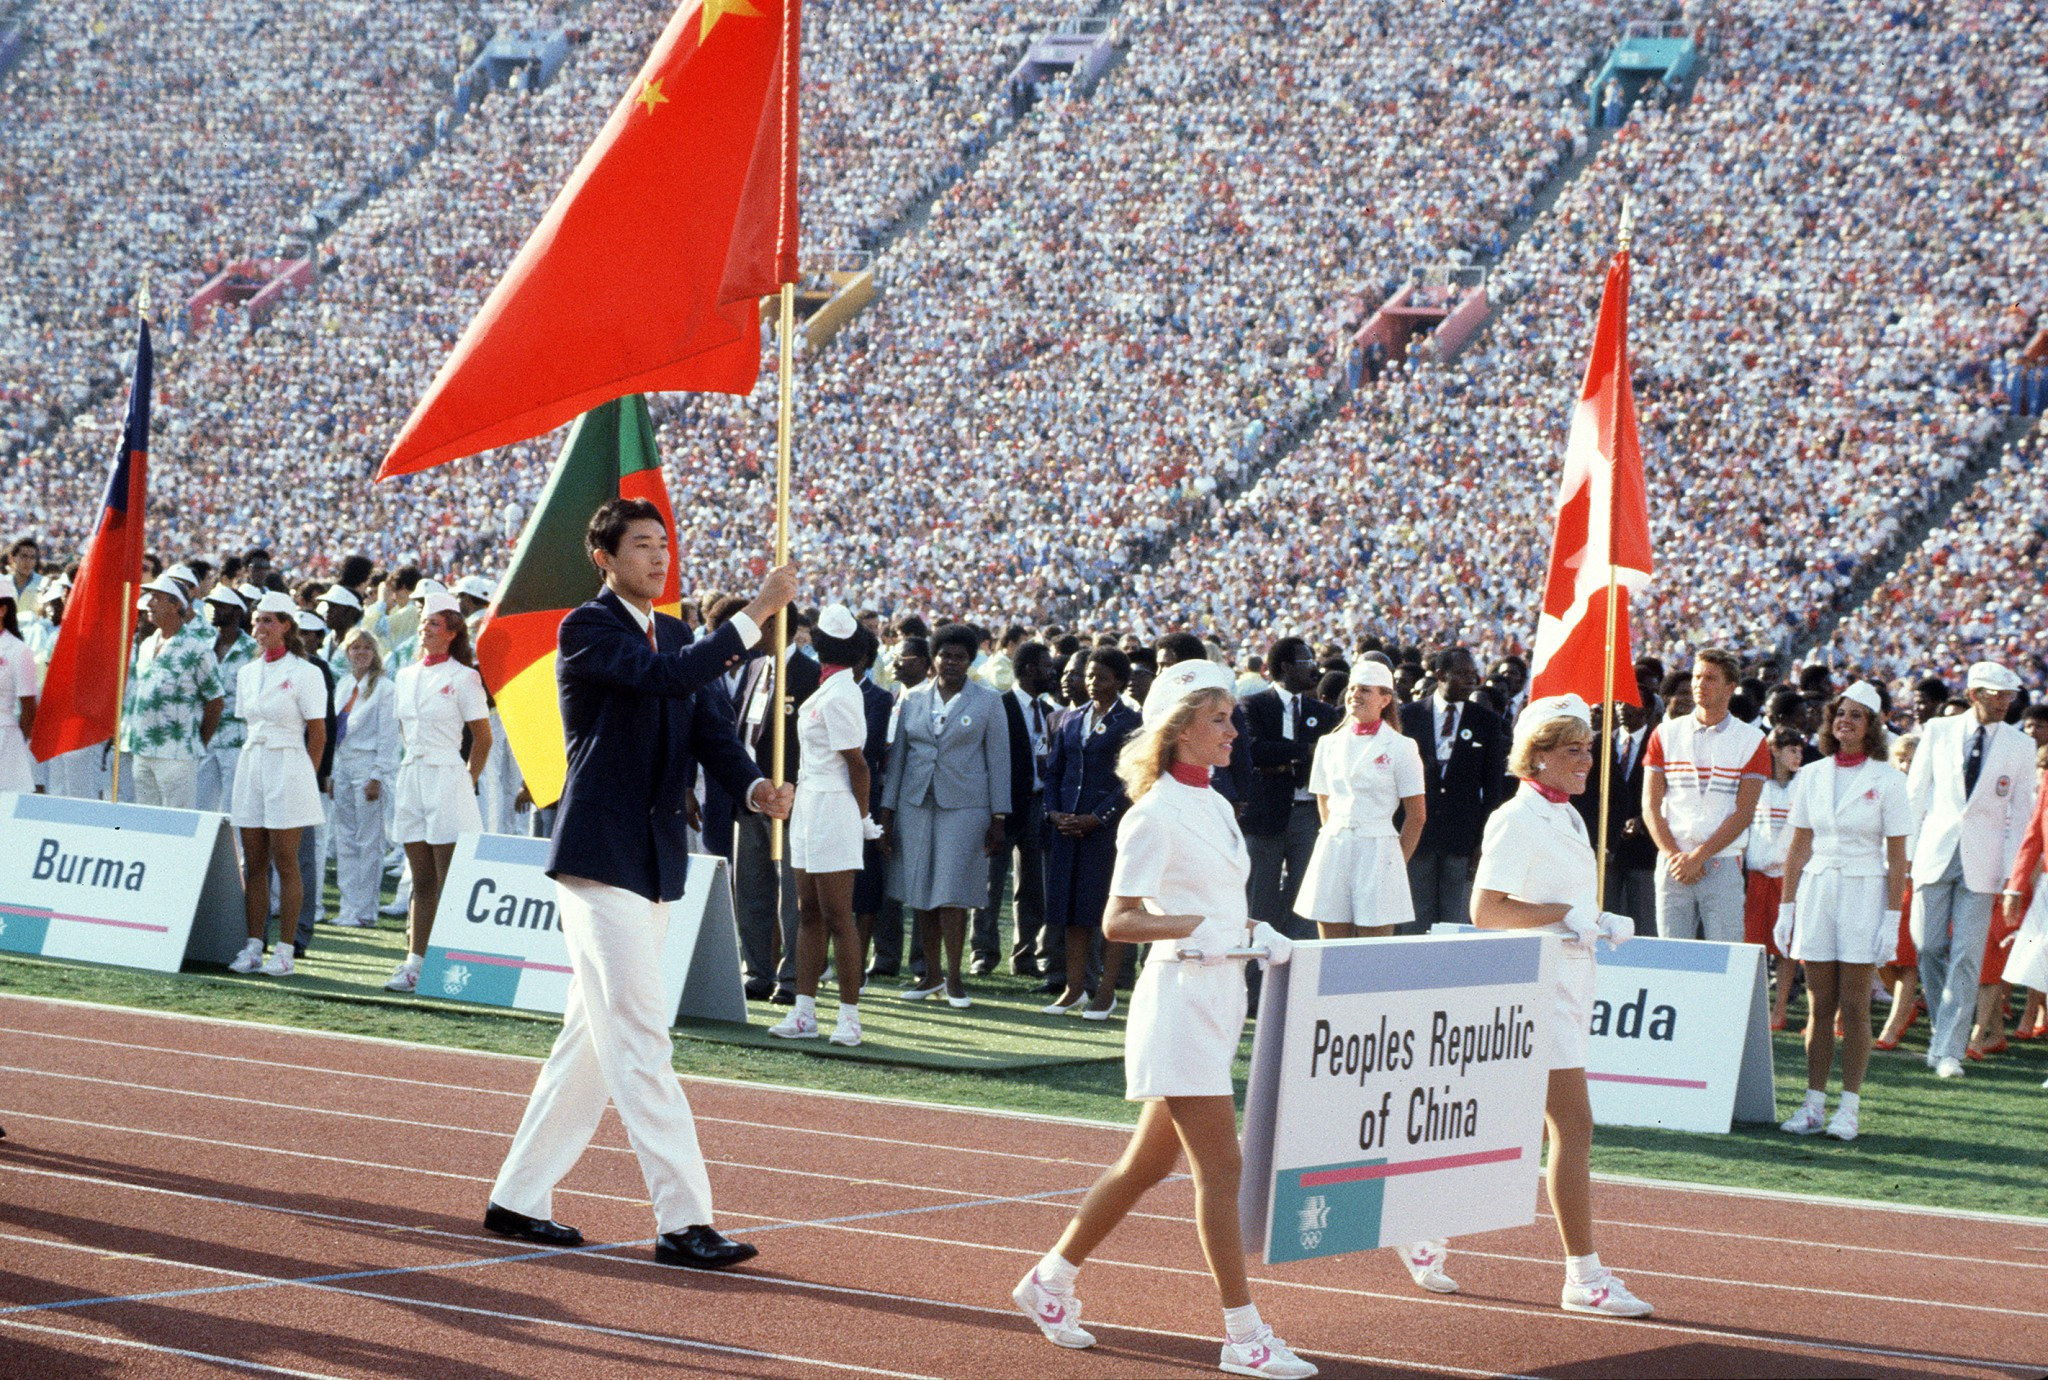 A deal cut at the IOC Session in Montevideo in 1979 paved for China to finally return to the Olympic Games after a 32-year absence at Los Angeles in 1984 ©Getty Images